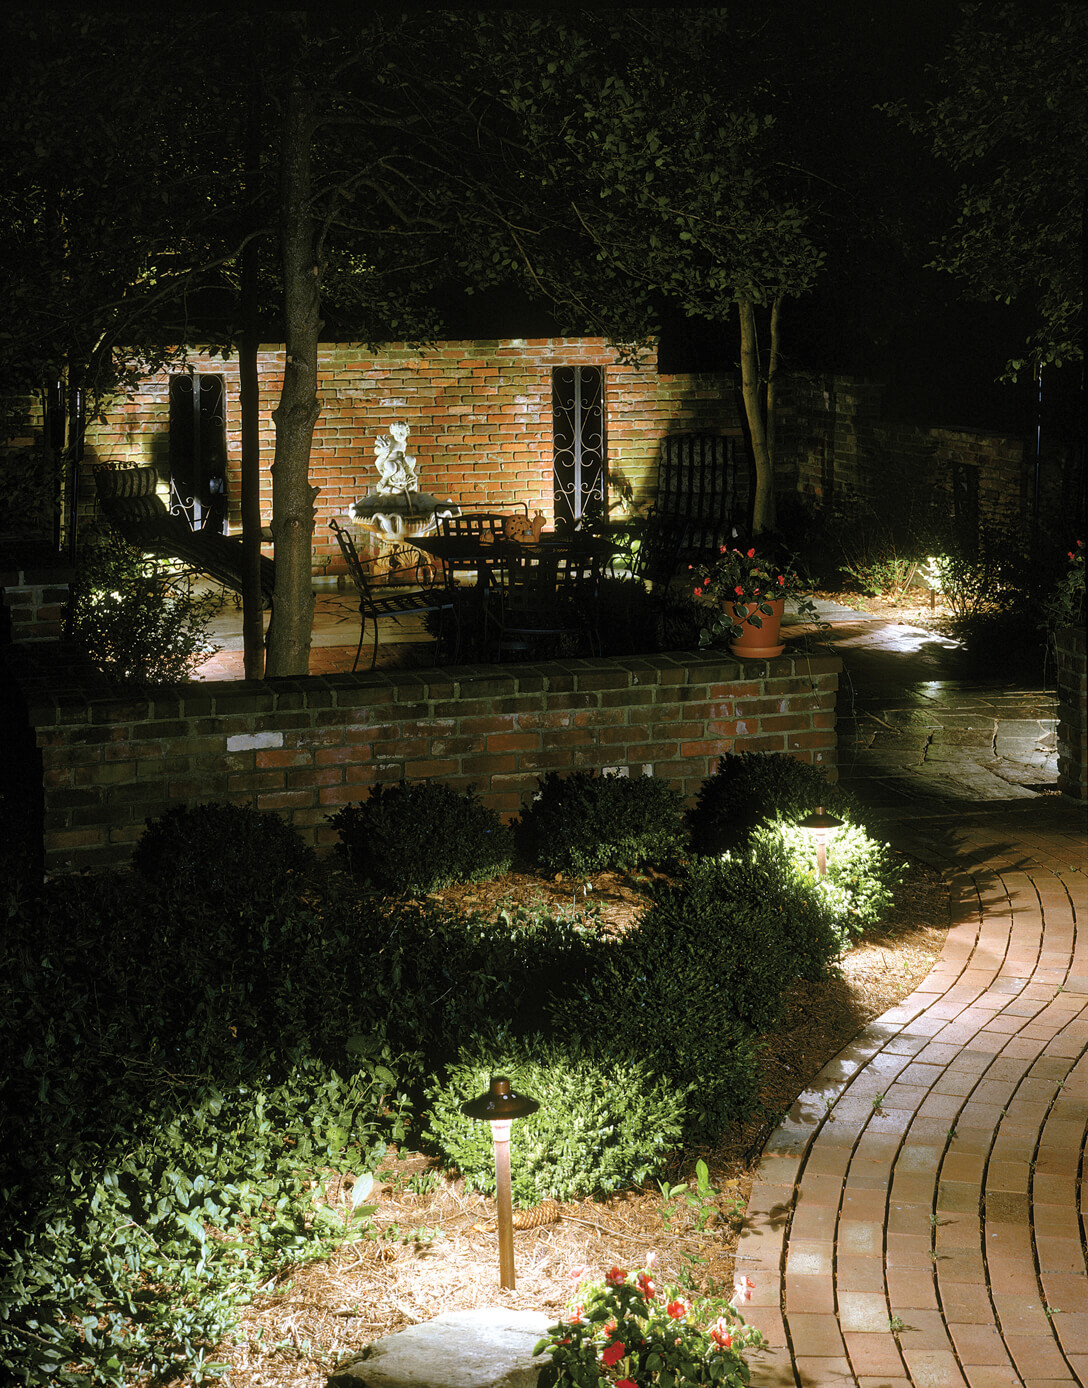 Well lit path and patio